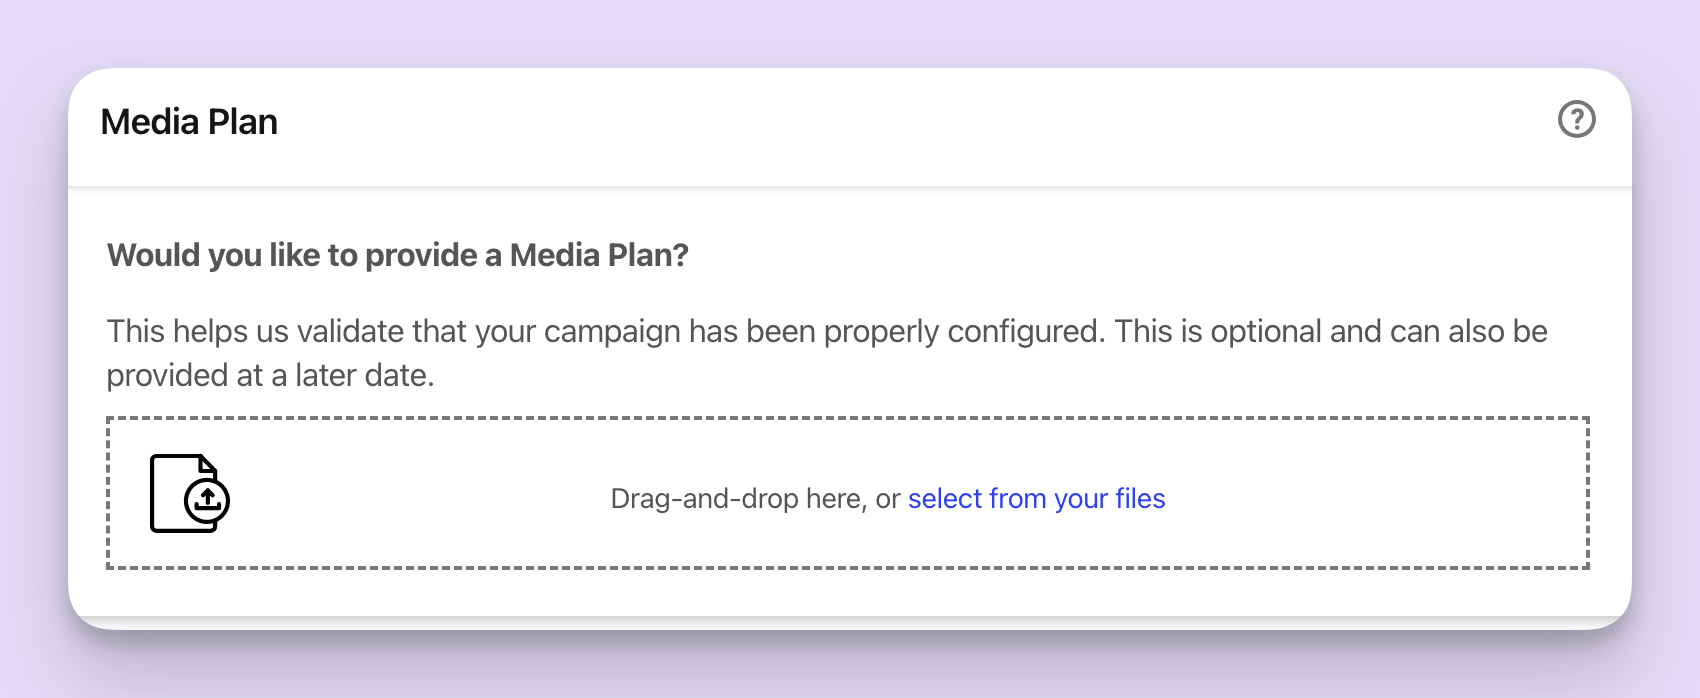 The Media Plan modal lets you upload files of any type.